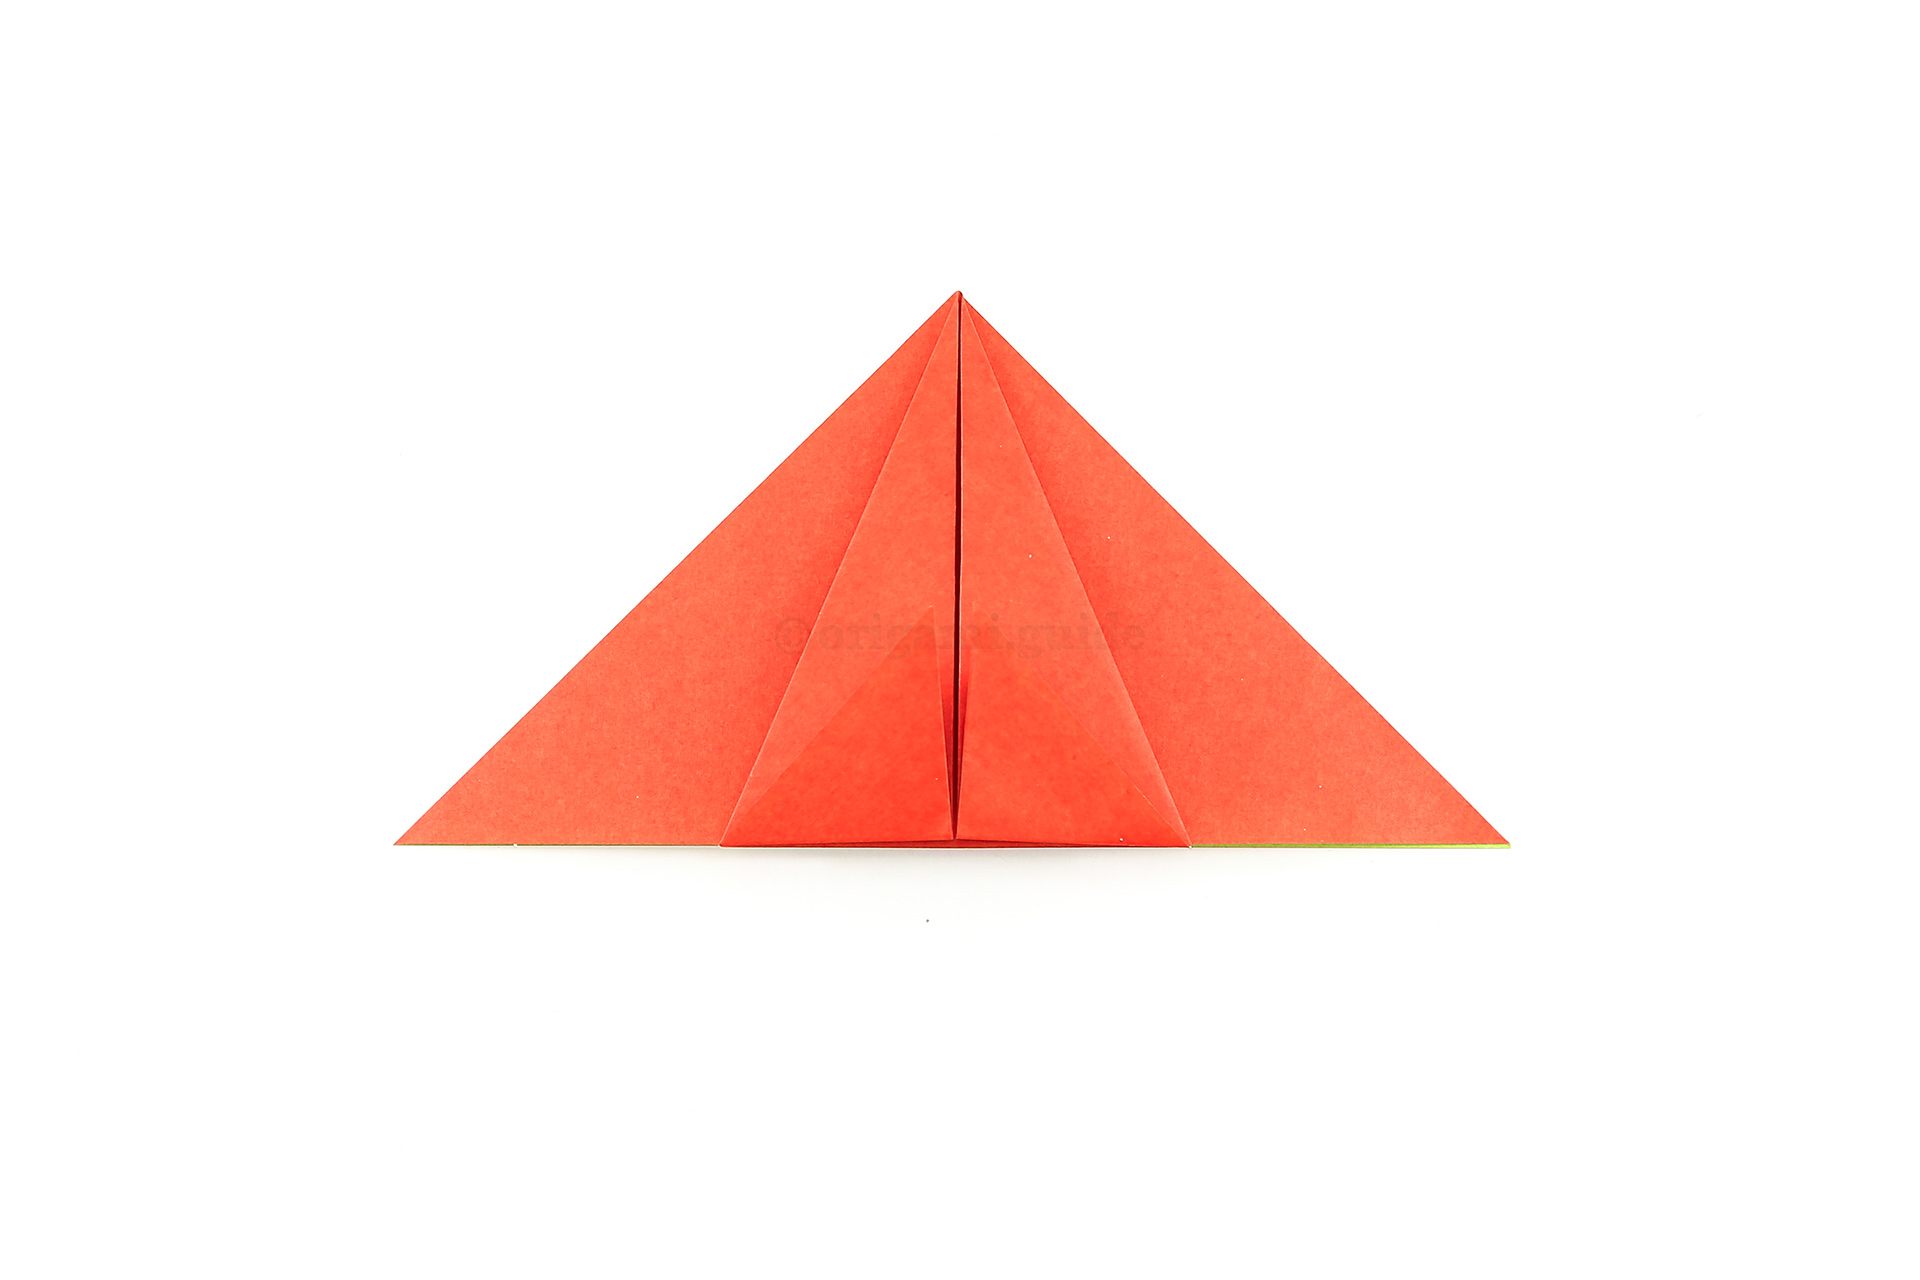 Next, fold the two lower flaps upward, aligning with the bottom edge of the triangle.